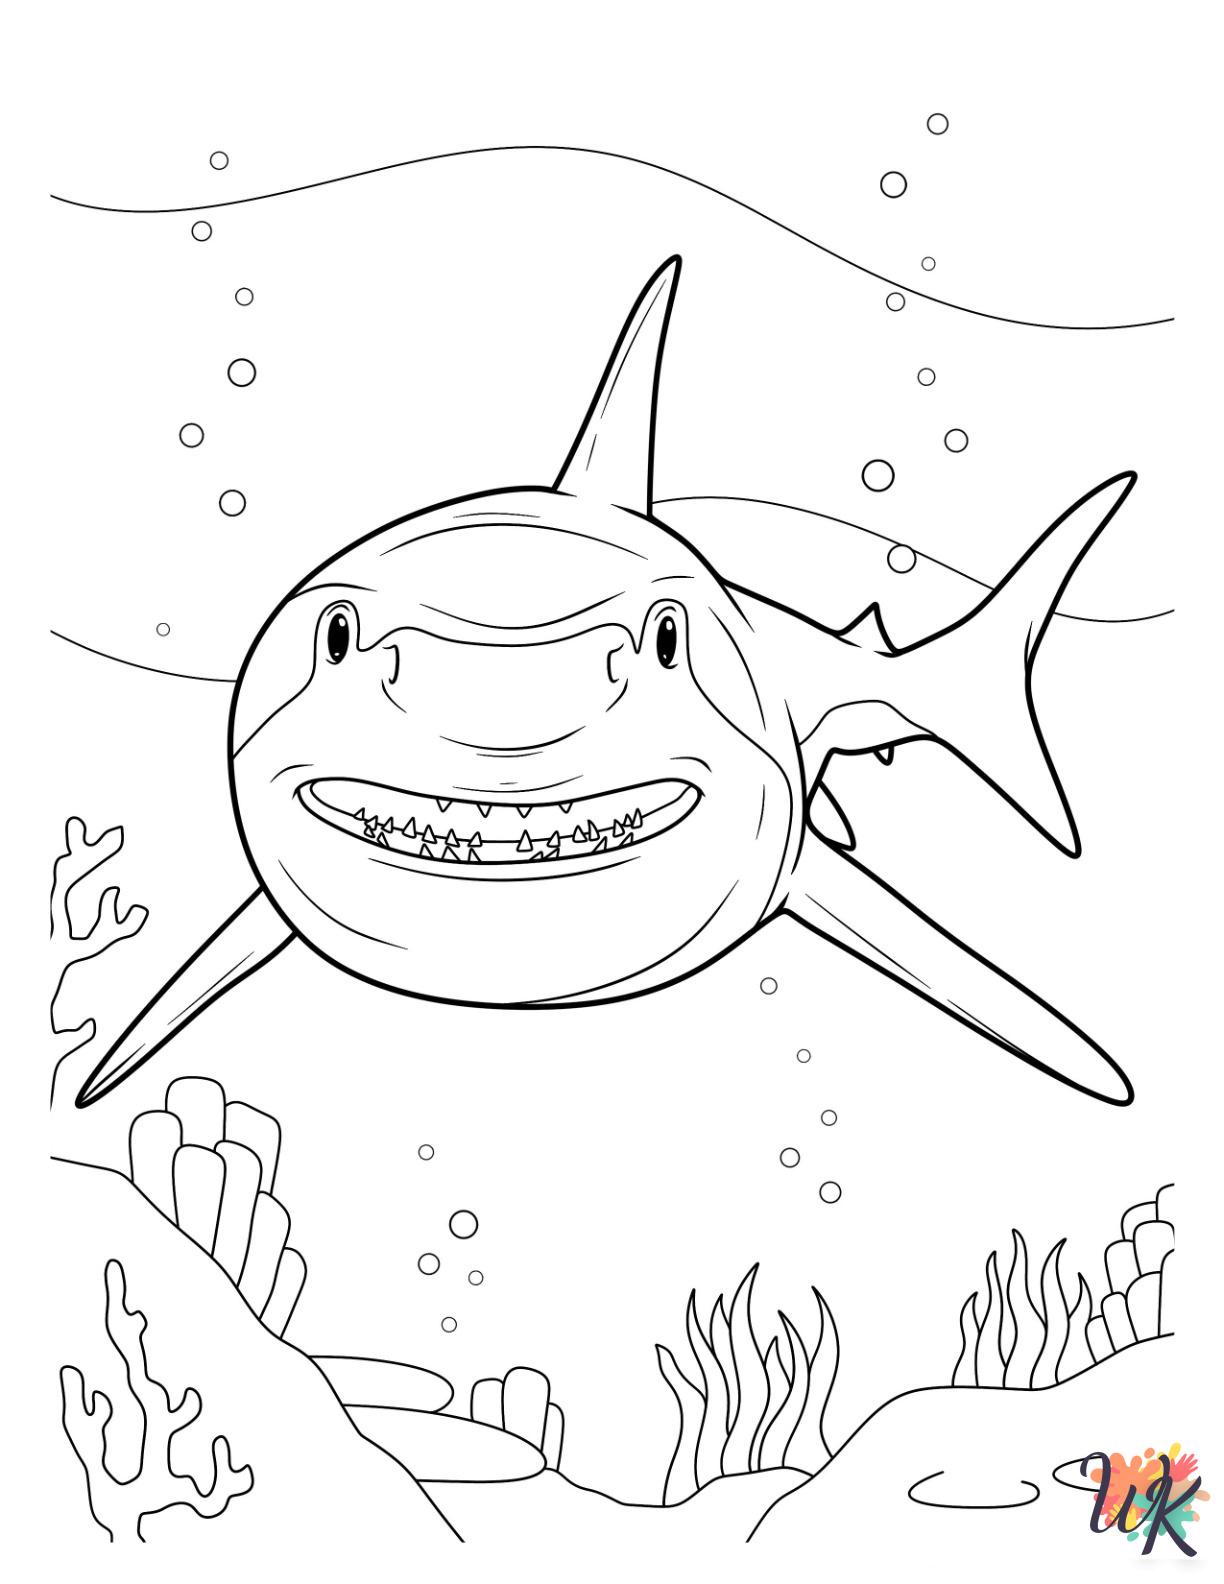 Shark decorations coloring pages